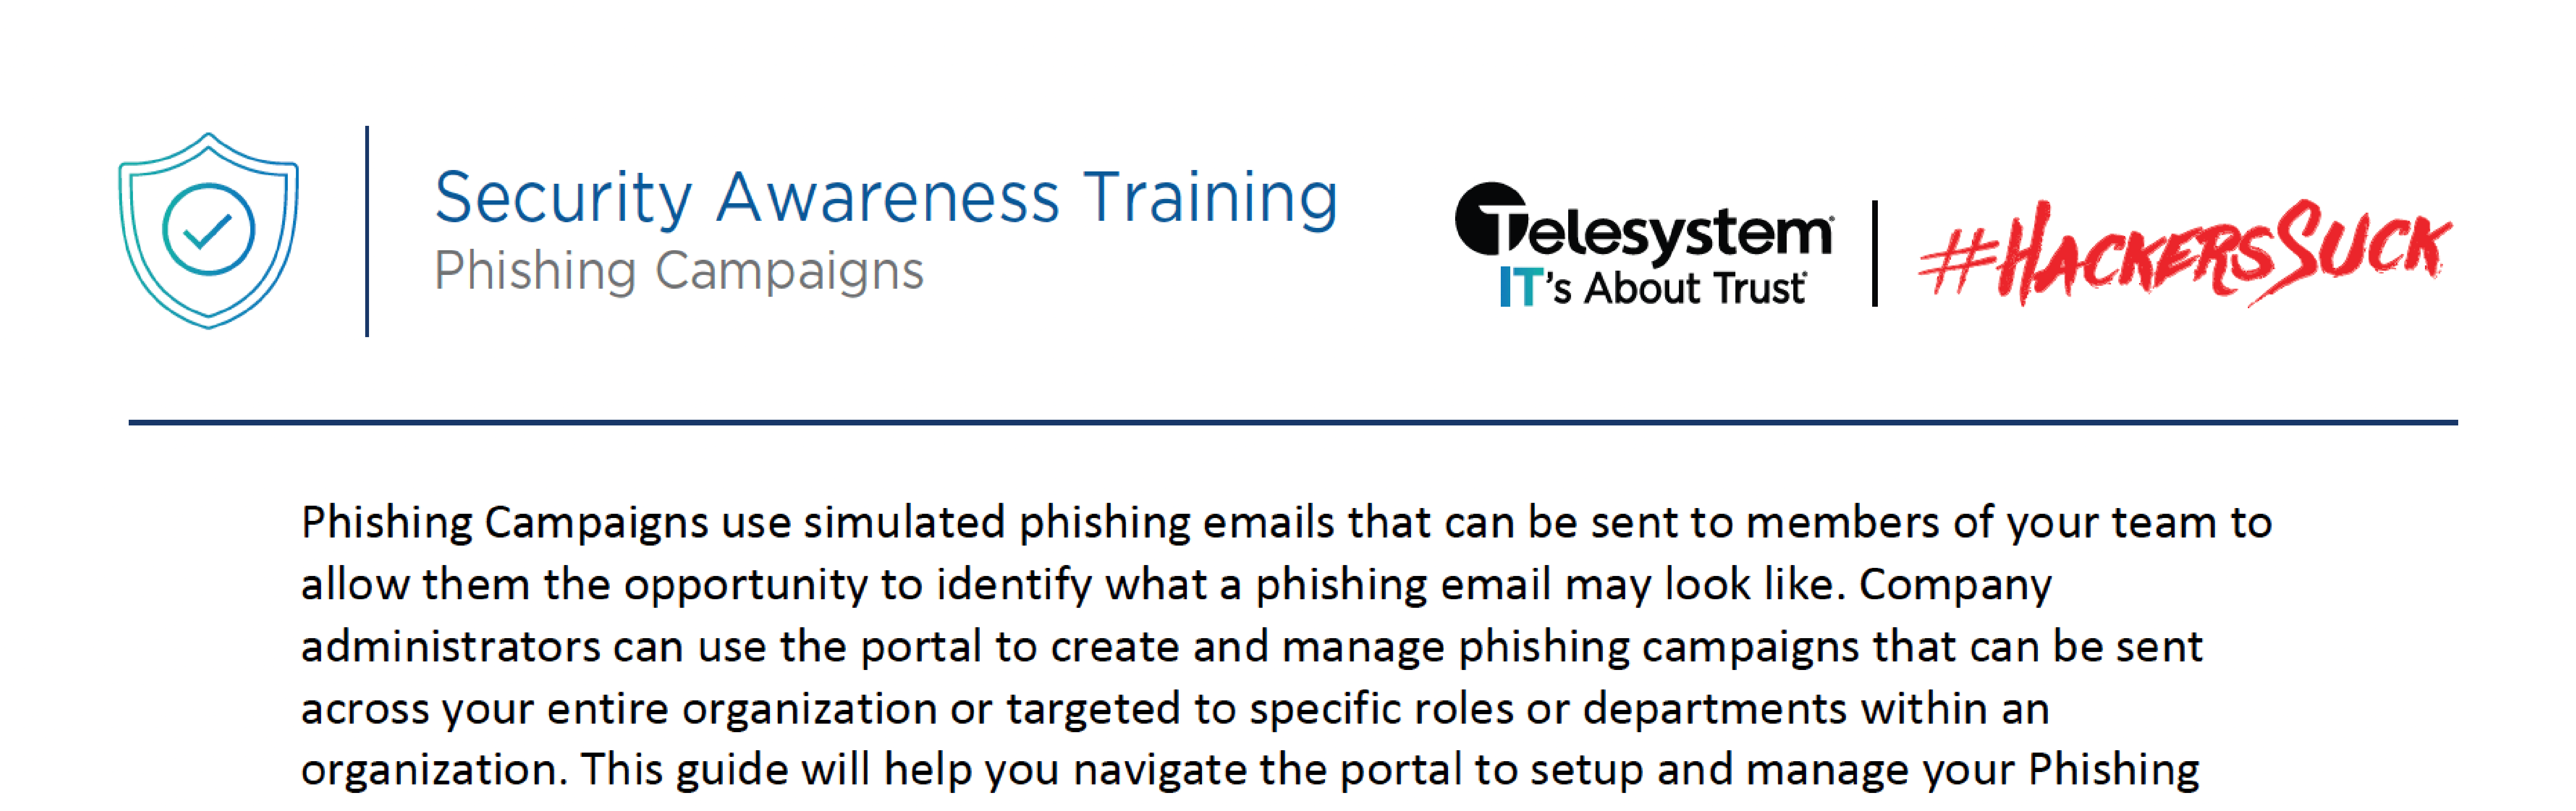 Security Awareness Training - Phishing Campaigns Guide Thumbnail